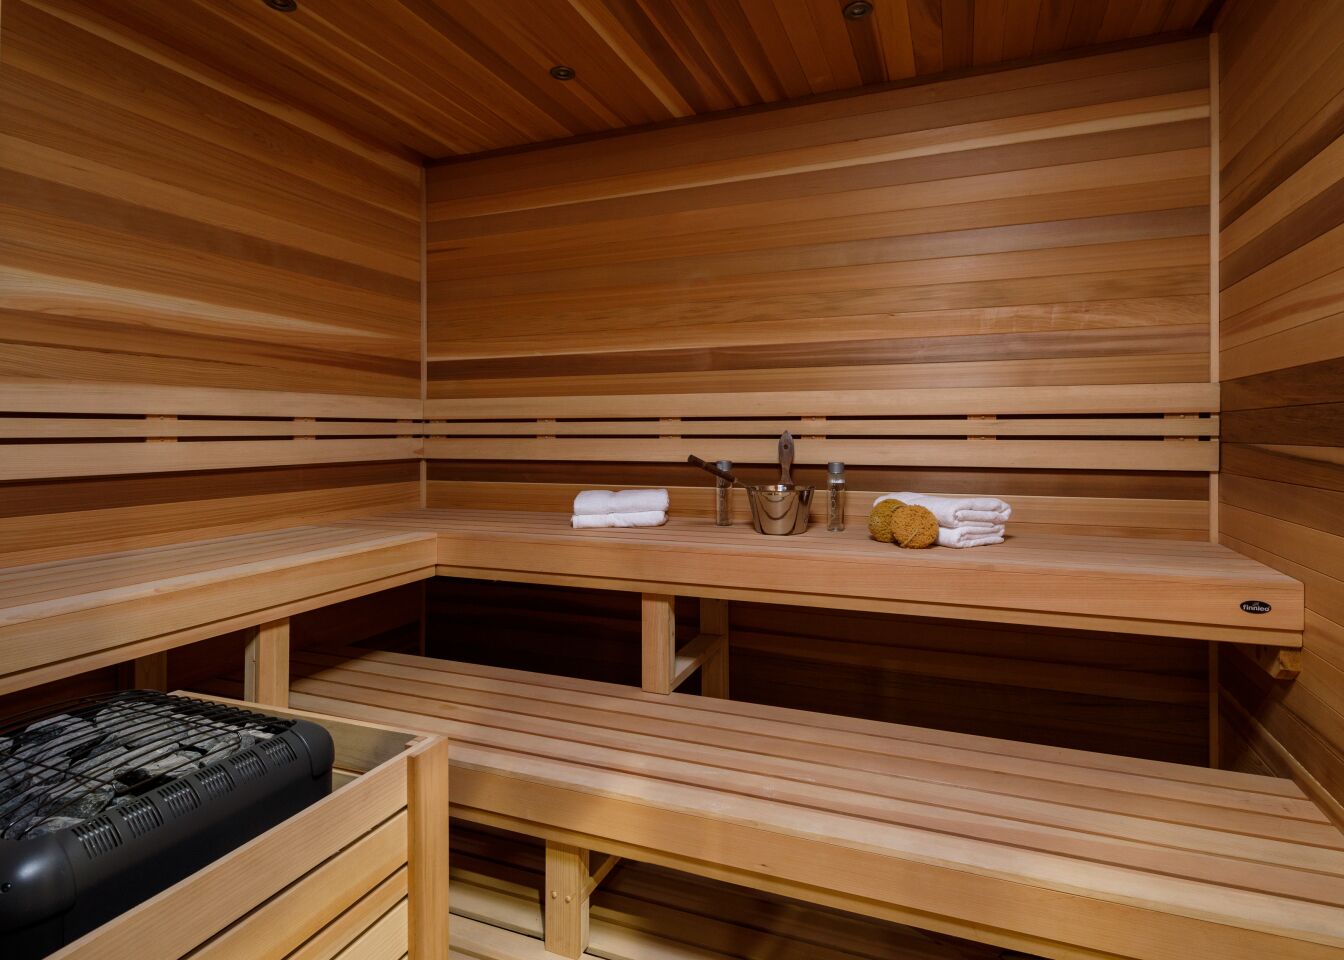 There are spa amenities including a dry sauna.